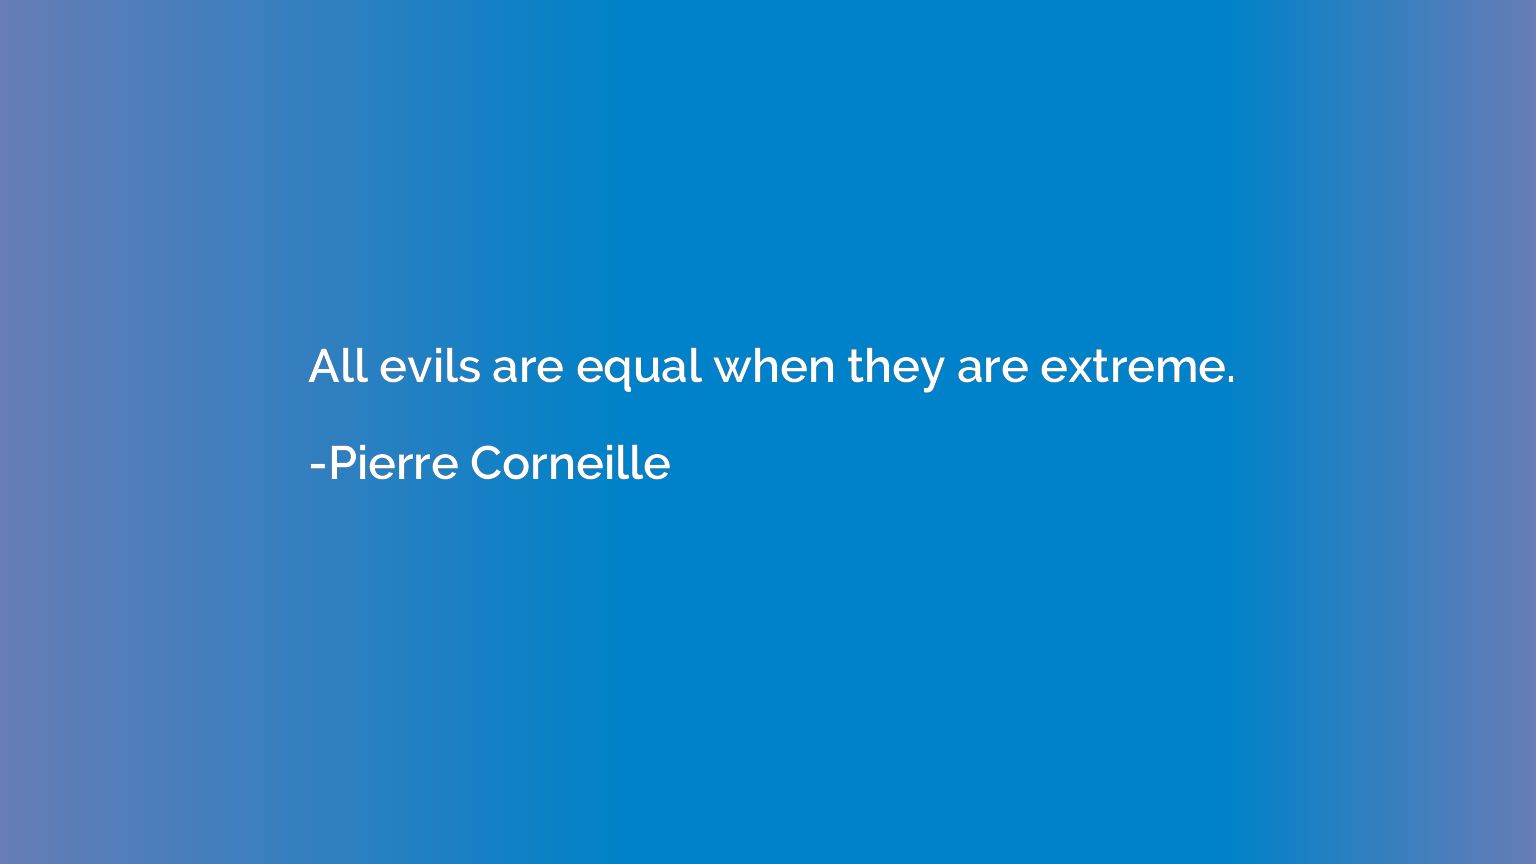 All evils are equal when they are extreme.